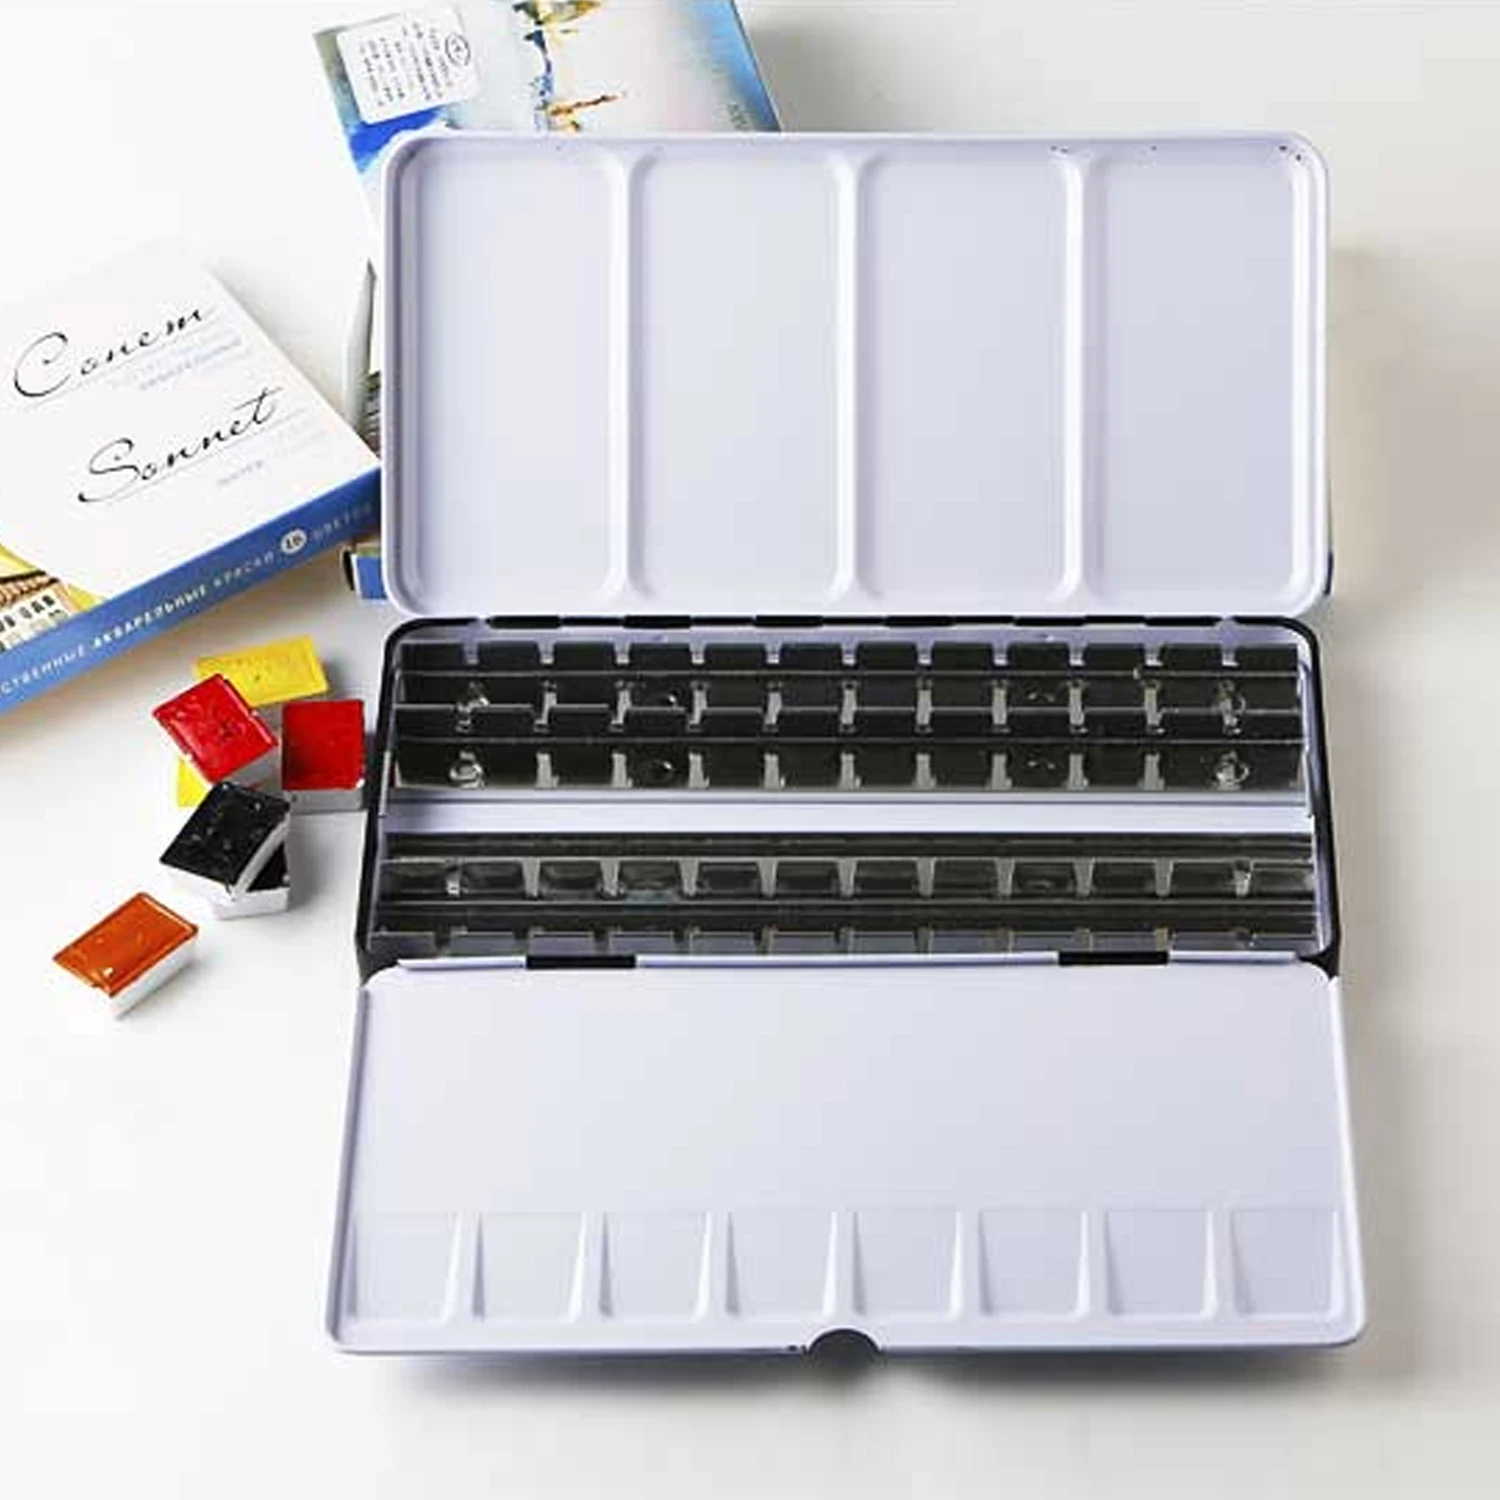 48 Gird Empty Watercolor Tins Pans Palette Paint Case Box with 48pcs Half Pans for Artist Student Beginners Painting Box Palette